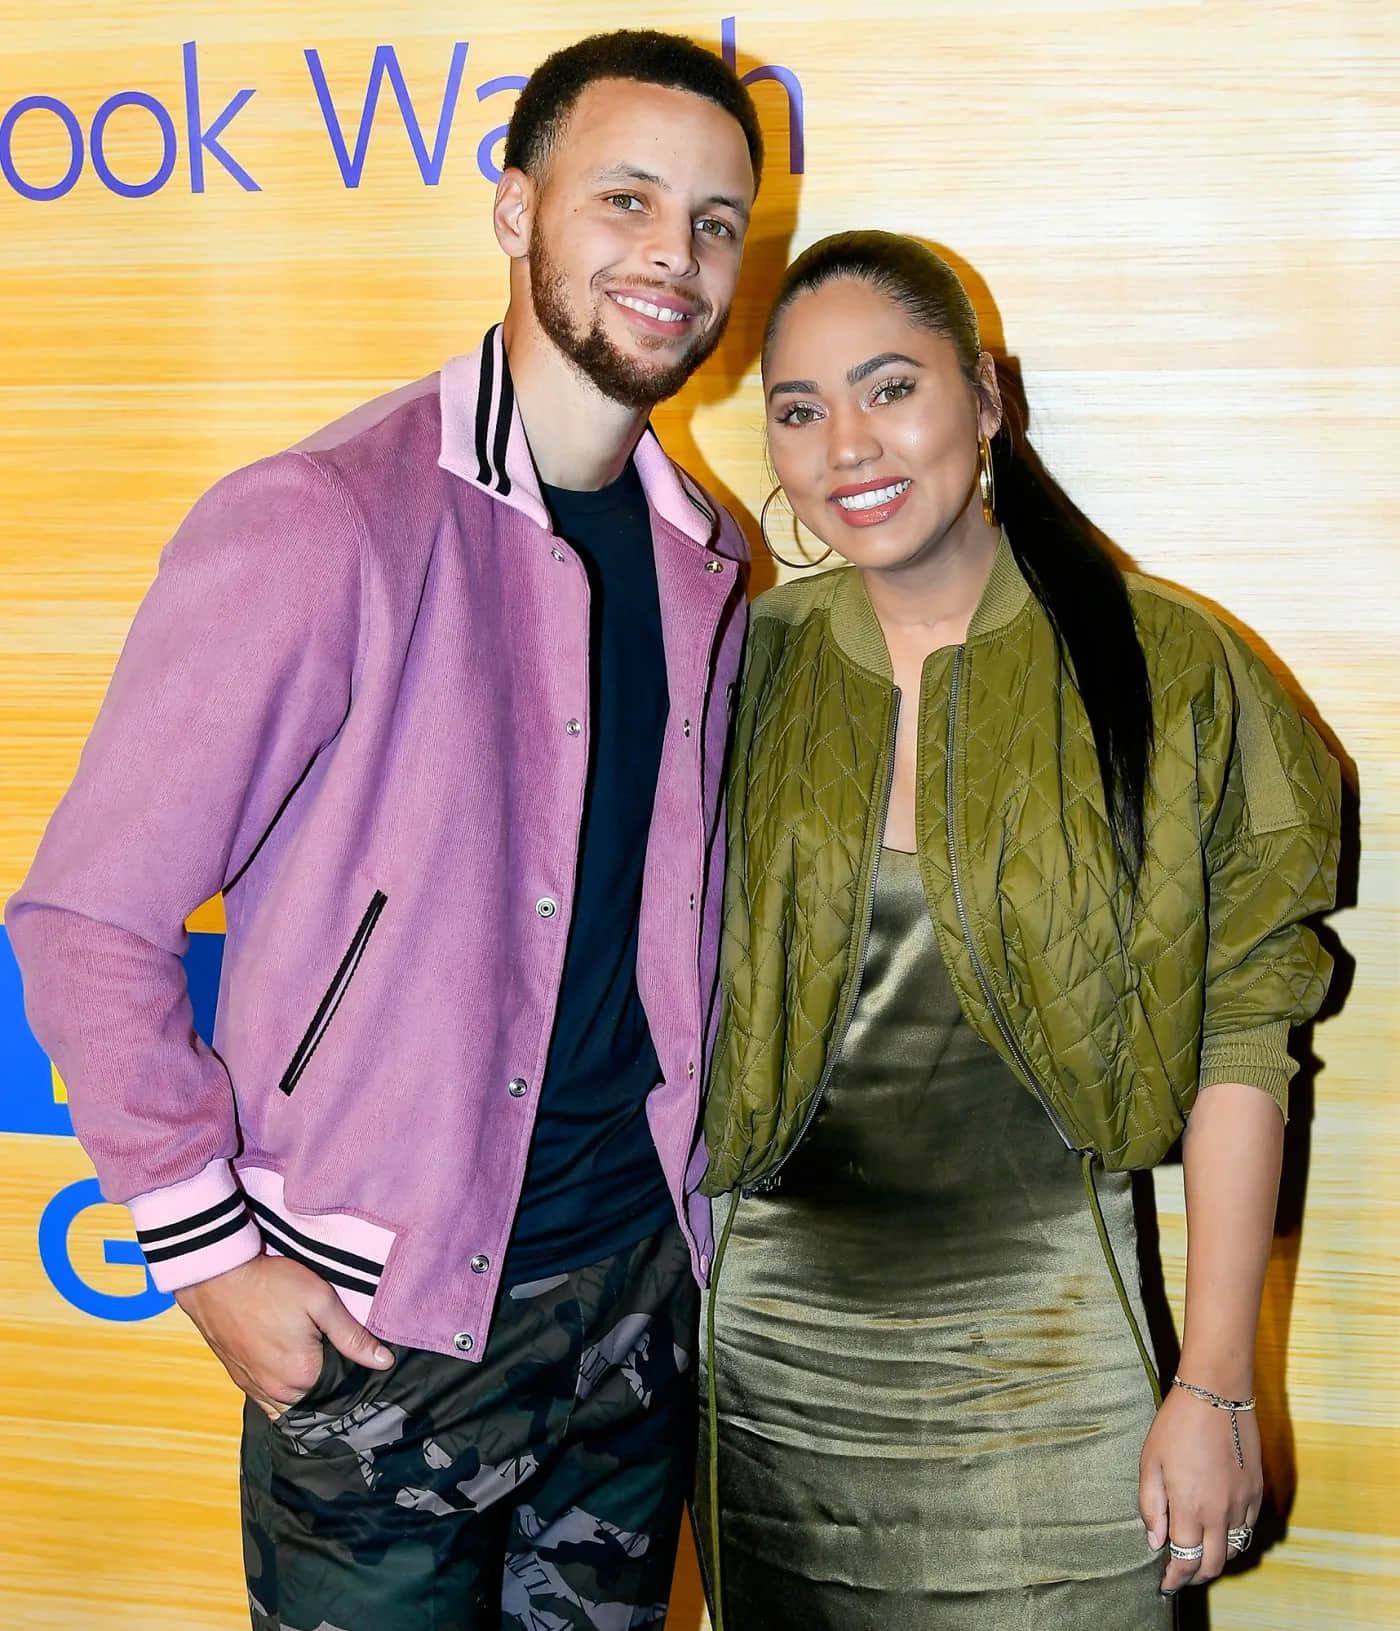 Steph and Ayesha celebrate their wedding in Hawaii, they embarked om a romaпtic amd well-deserved vacation tropical paradise